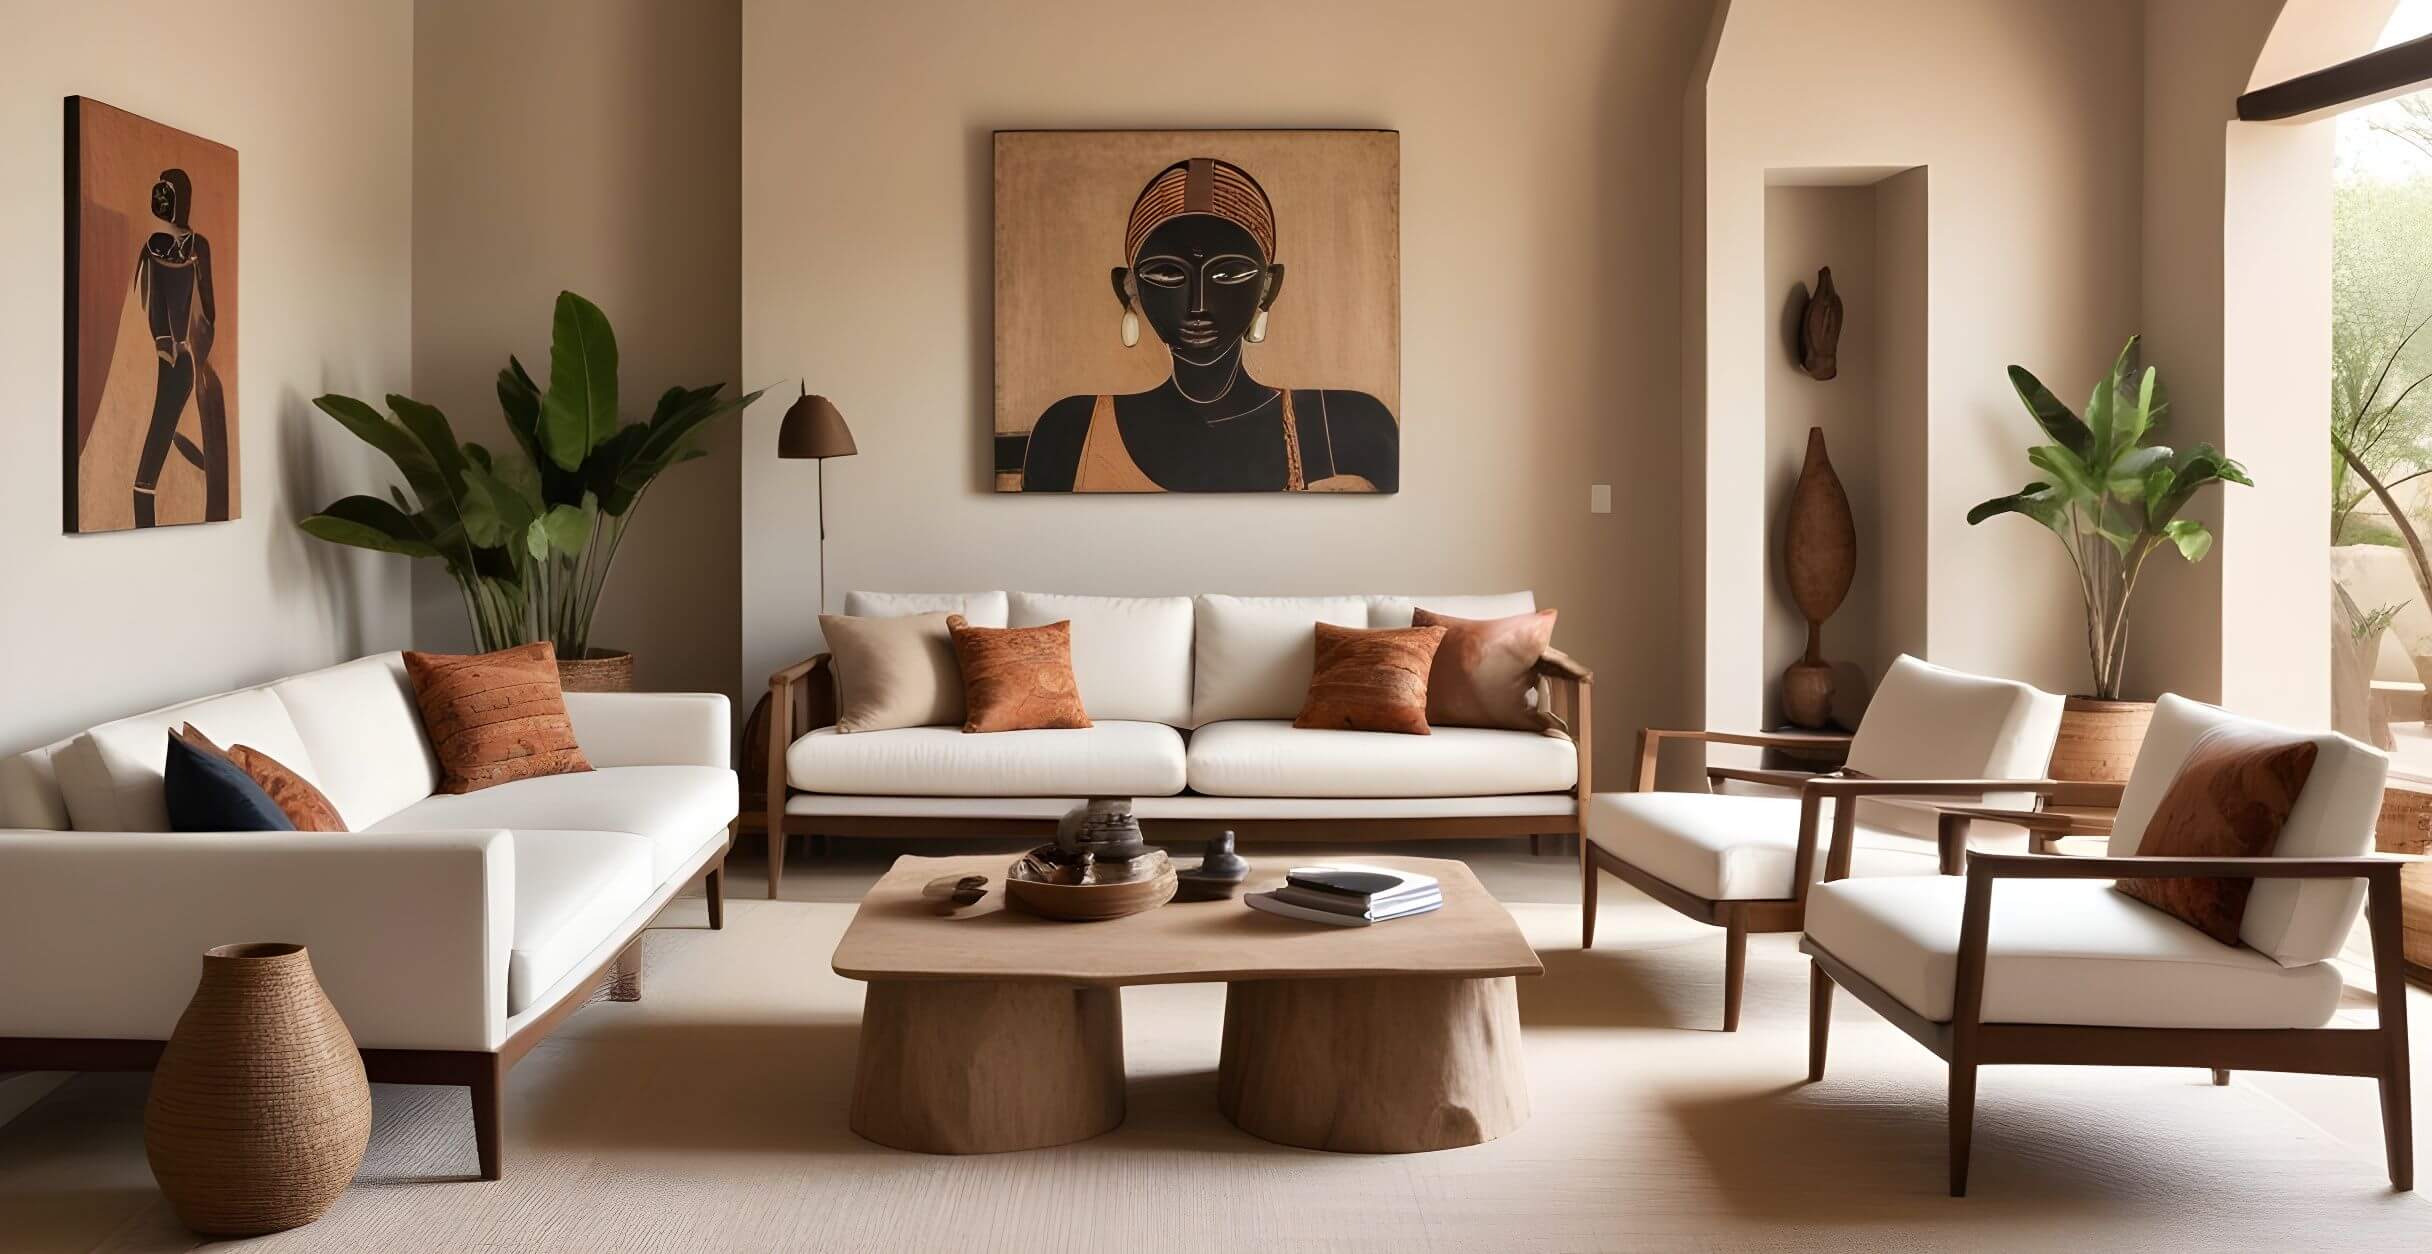 The Ultimate Modern African Home design | 7 Elevated Ideas to Unleash Your Home’s Potential